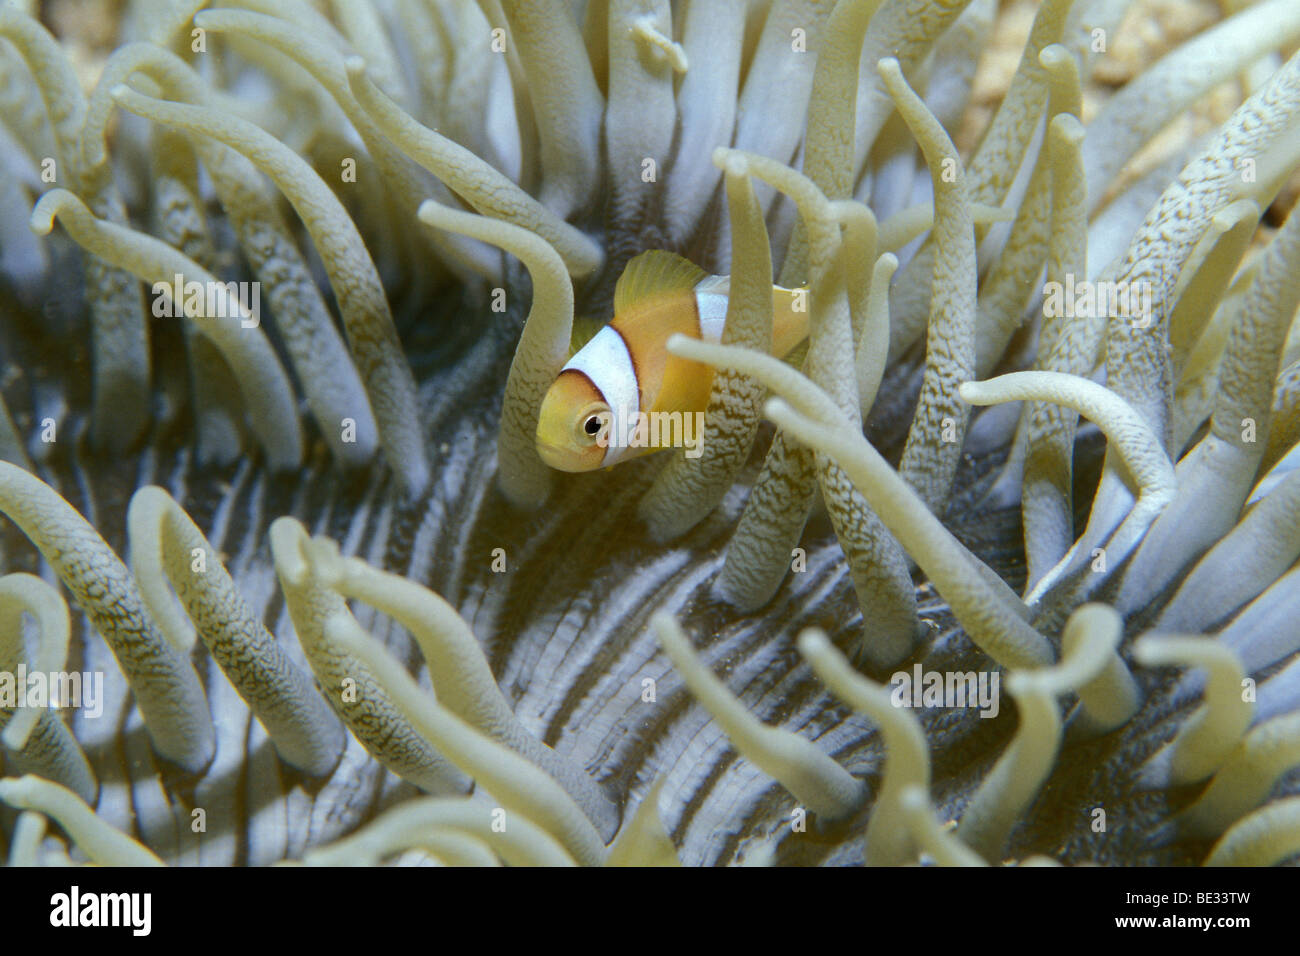 Two-banded Anemonefish in Leather-Anemone, Amphiprion bicinctus, Heteractis crispa, Dahab, Sinai, Red Sea, Egypt Stock Photo